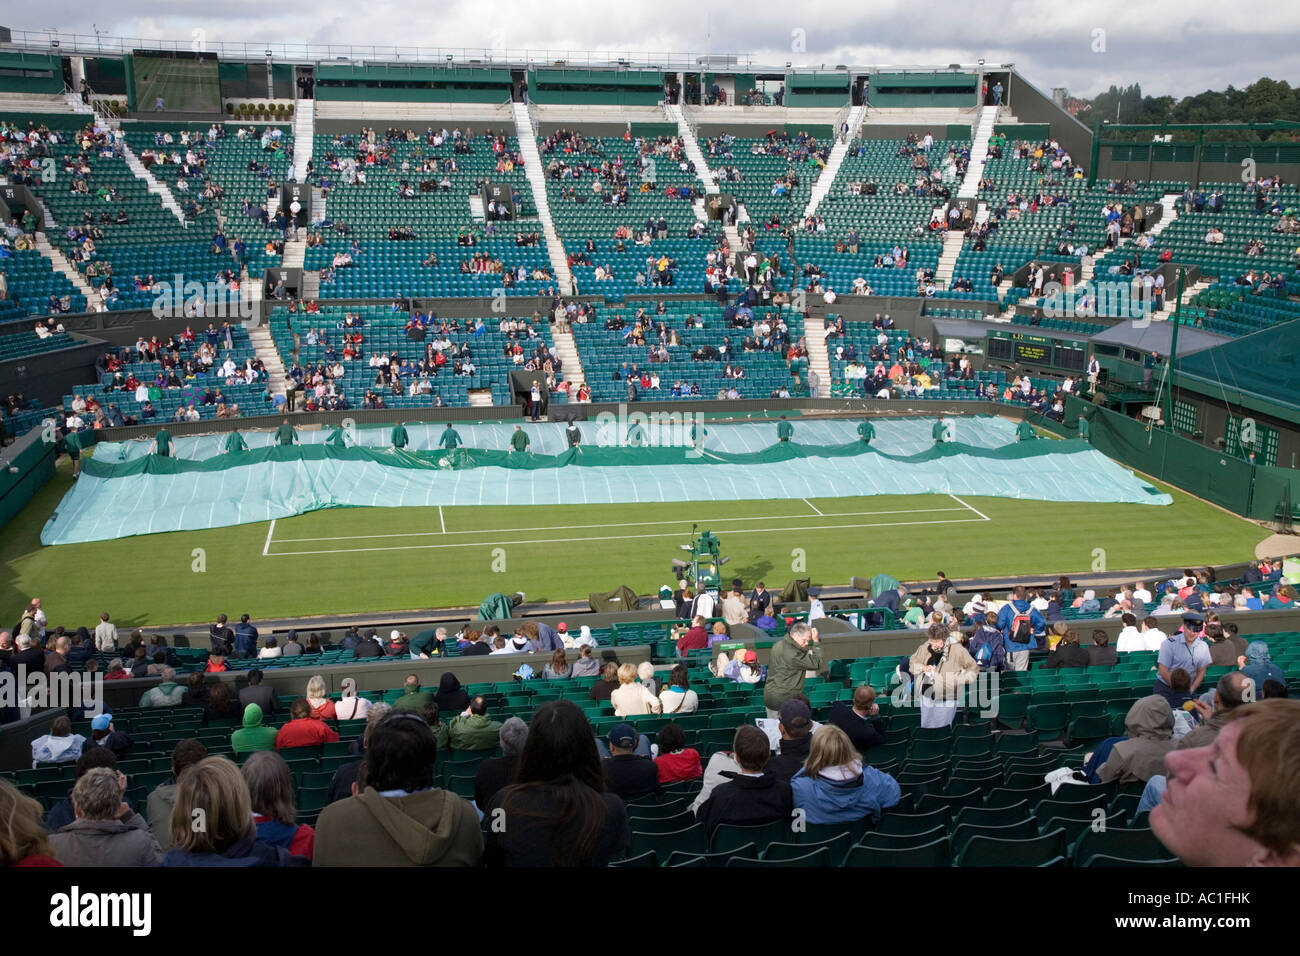 Covers being removed during Carlos Moya Tim Henman game at Centre Court without roof during Wimbledon tennis Championship Stock Photo